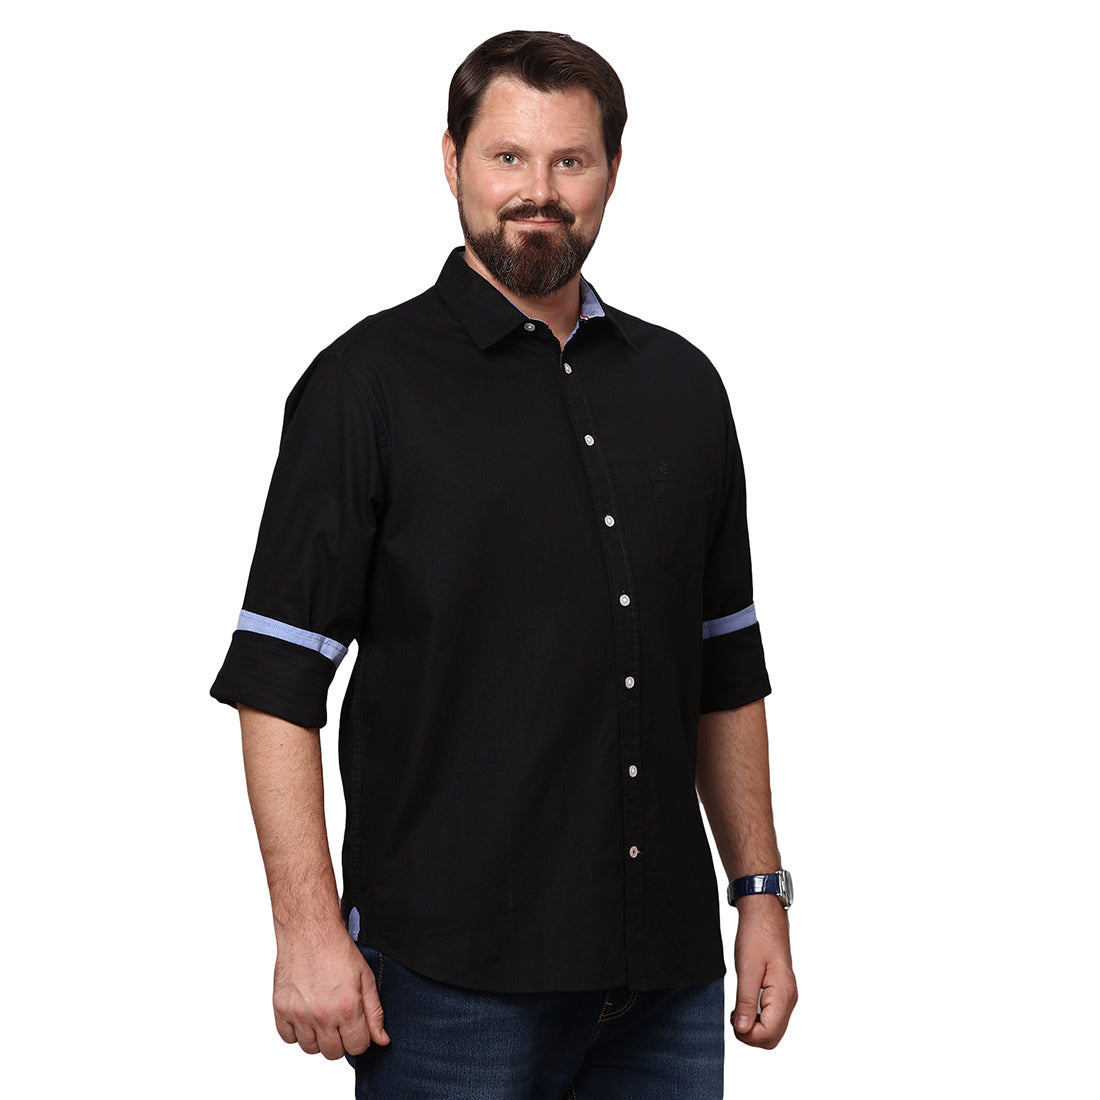 Big & Bold Solid Black Full Sleeves Slim Fit Casual Shirts (Plus Size) - Double Two